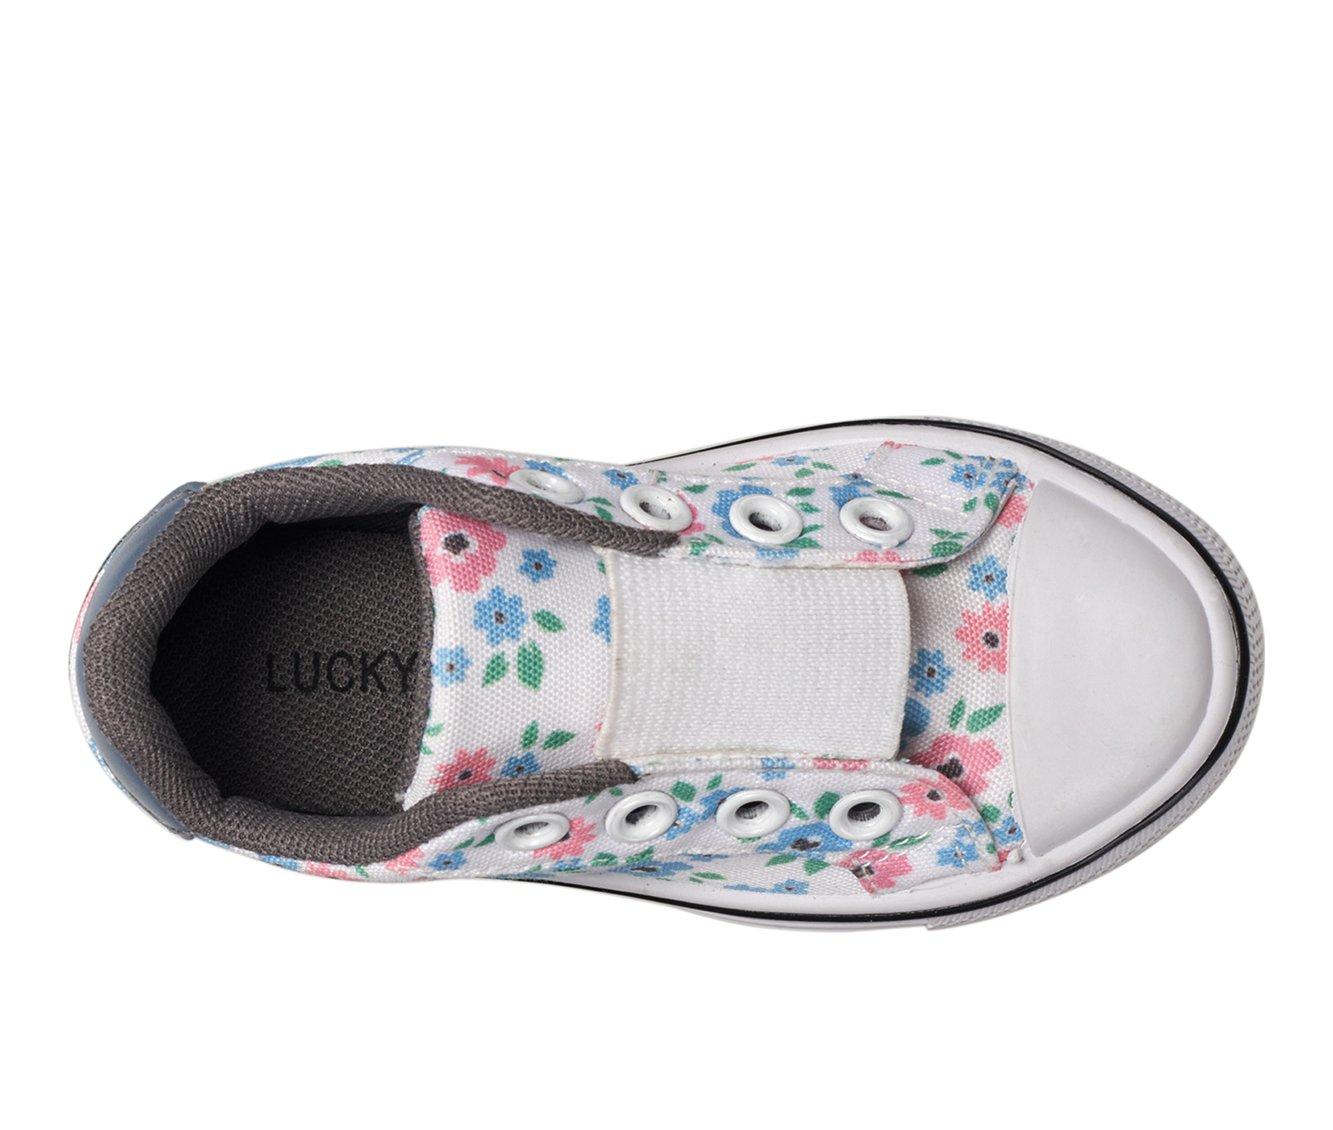 Girls' Lucky Brand Toddler Mae Casual Slip On Sneakers